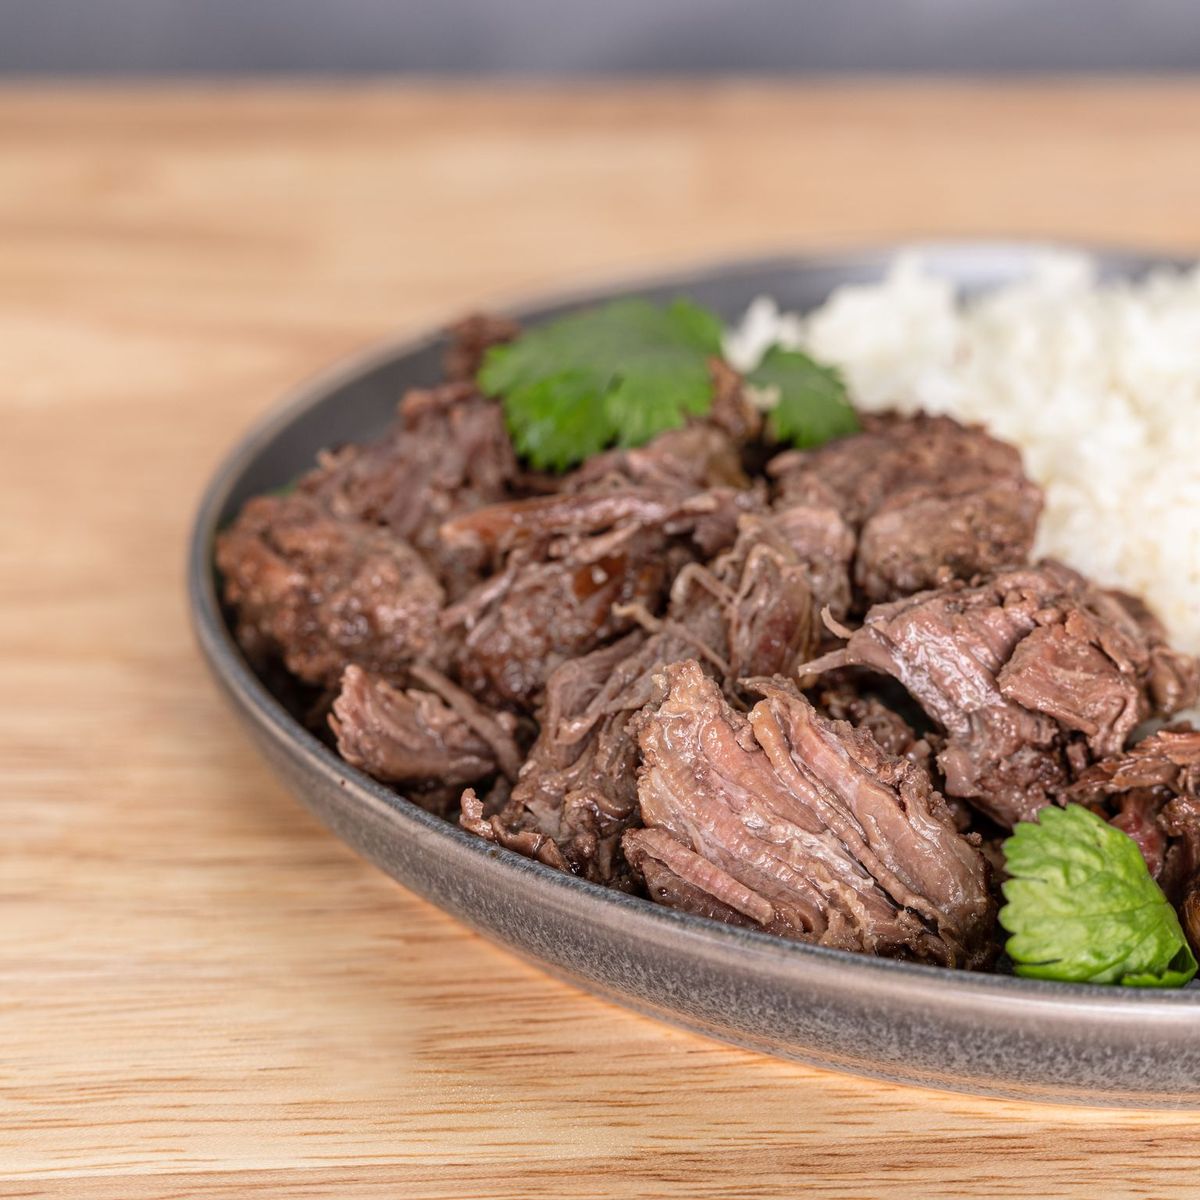 A plate of beef and rice, used for emergency food storage, on a wooden table.